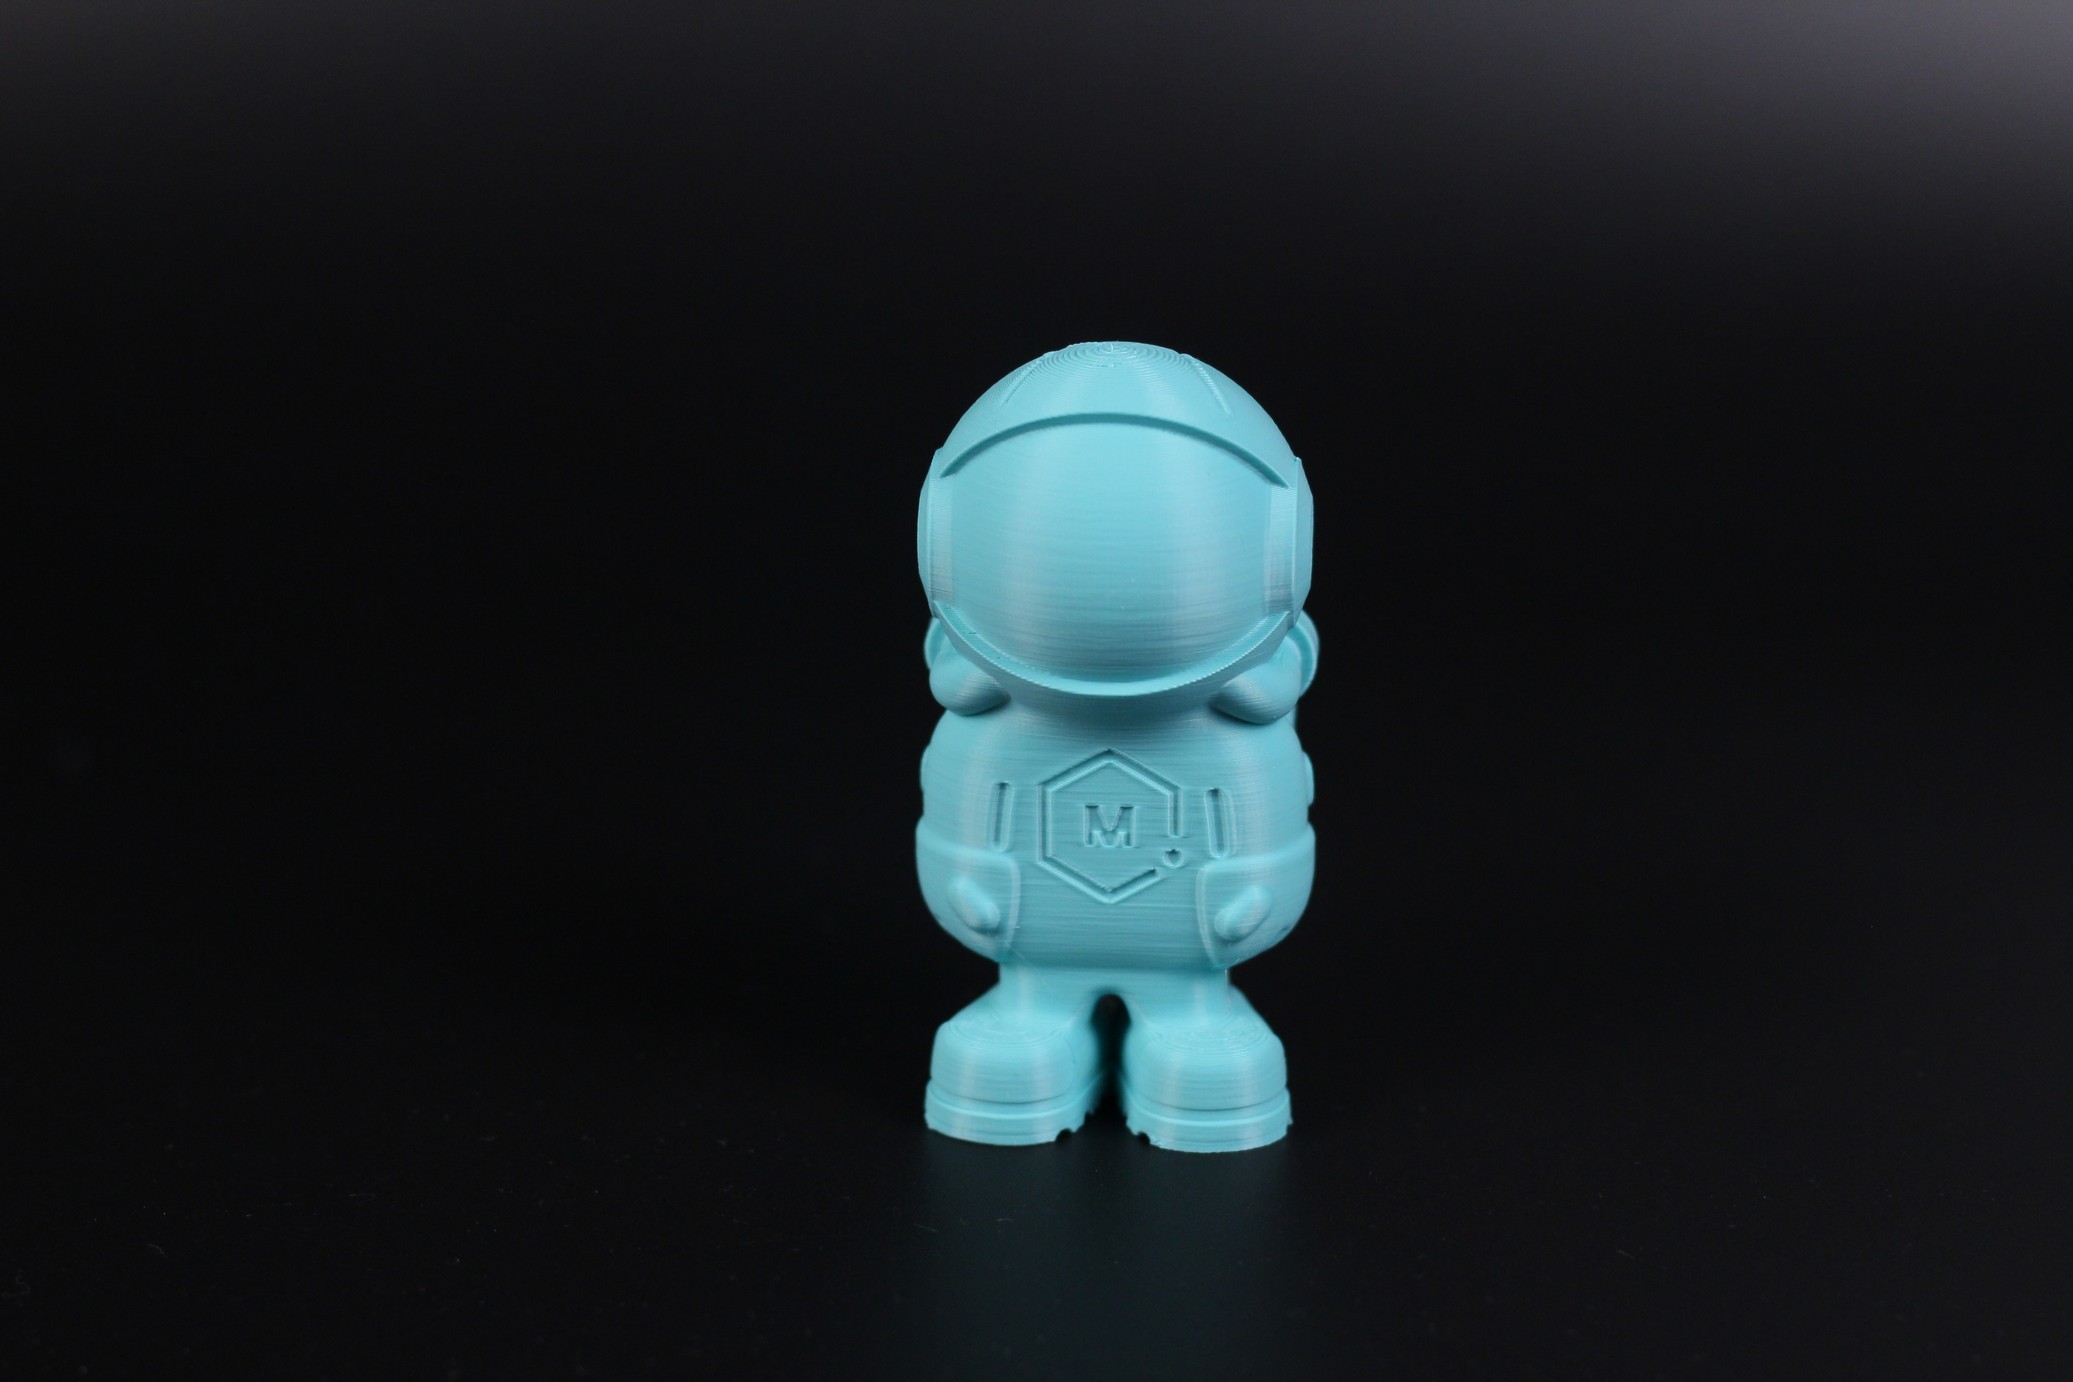 Phil A Ment printed on Anycubic Kobra Extrusion inconsistency 1 | Anycubic Kobra Review: The New Budget Standard